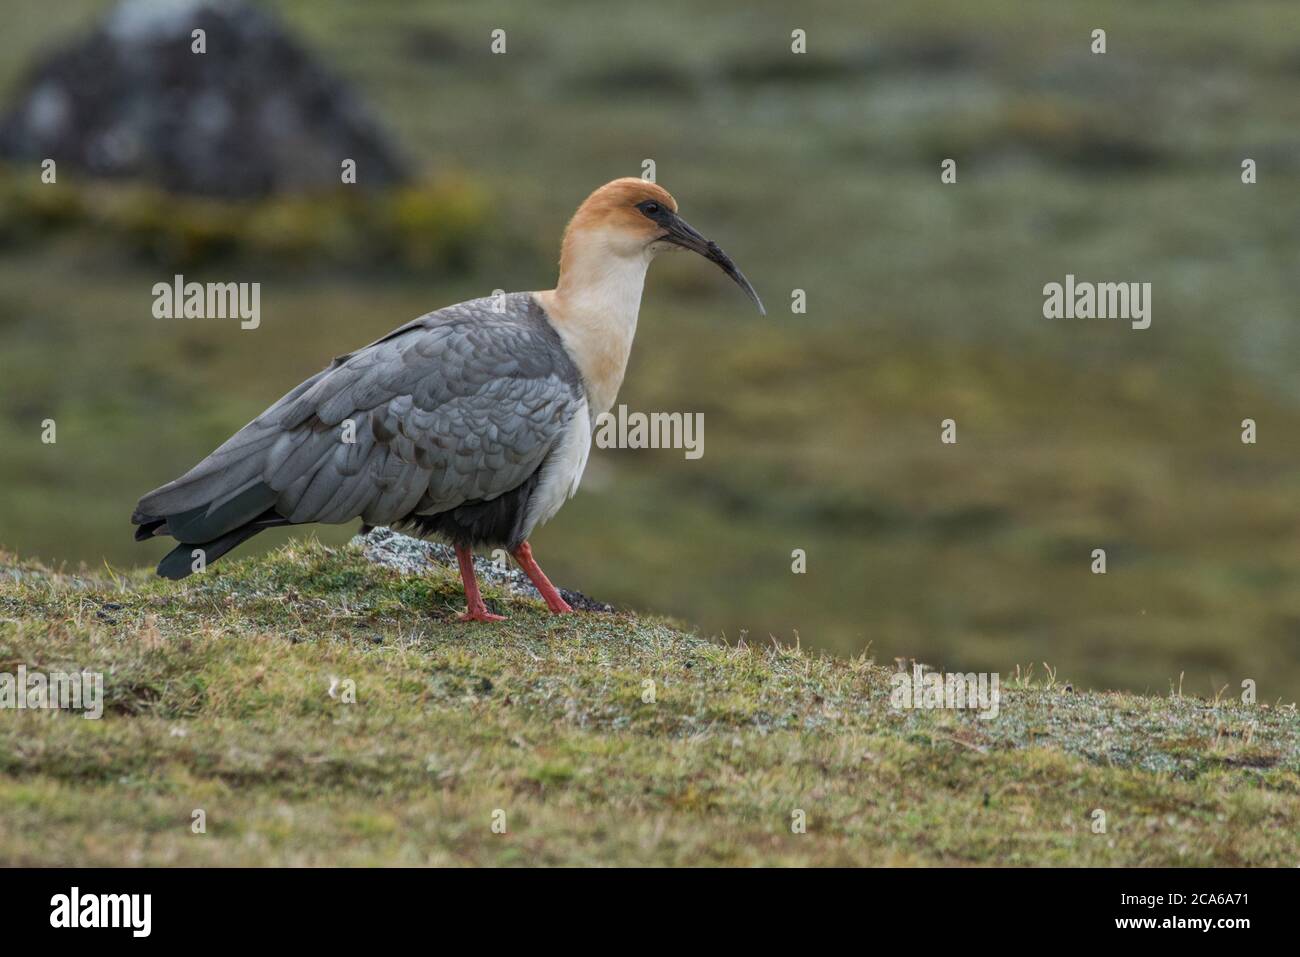 The Andean ibis (Theristicus) an unusual bird from high in the Andes mountains in Southern Peru. Stock Photo